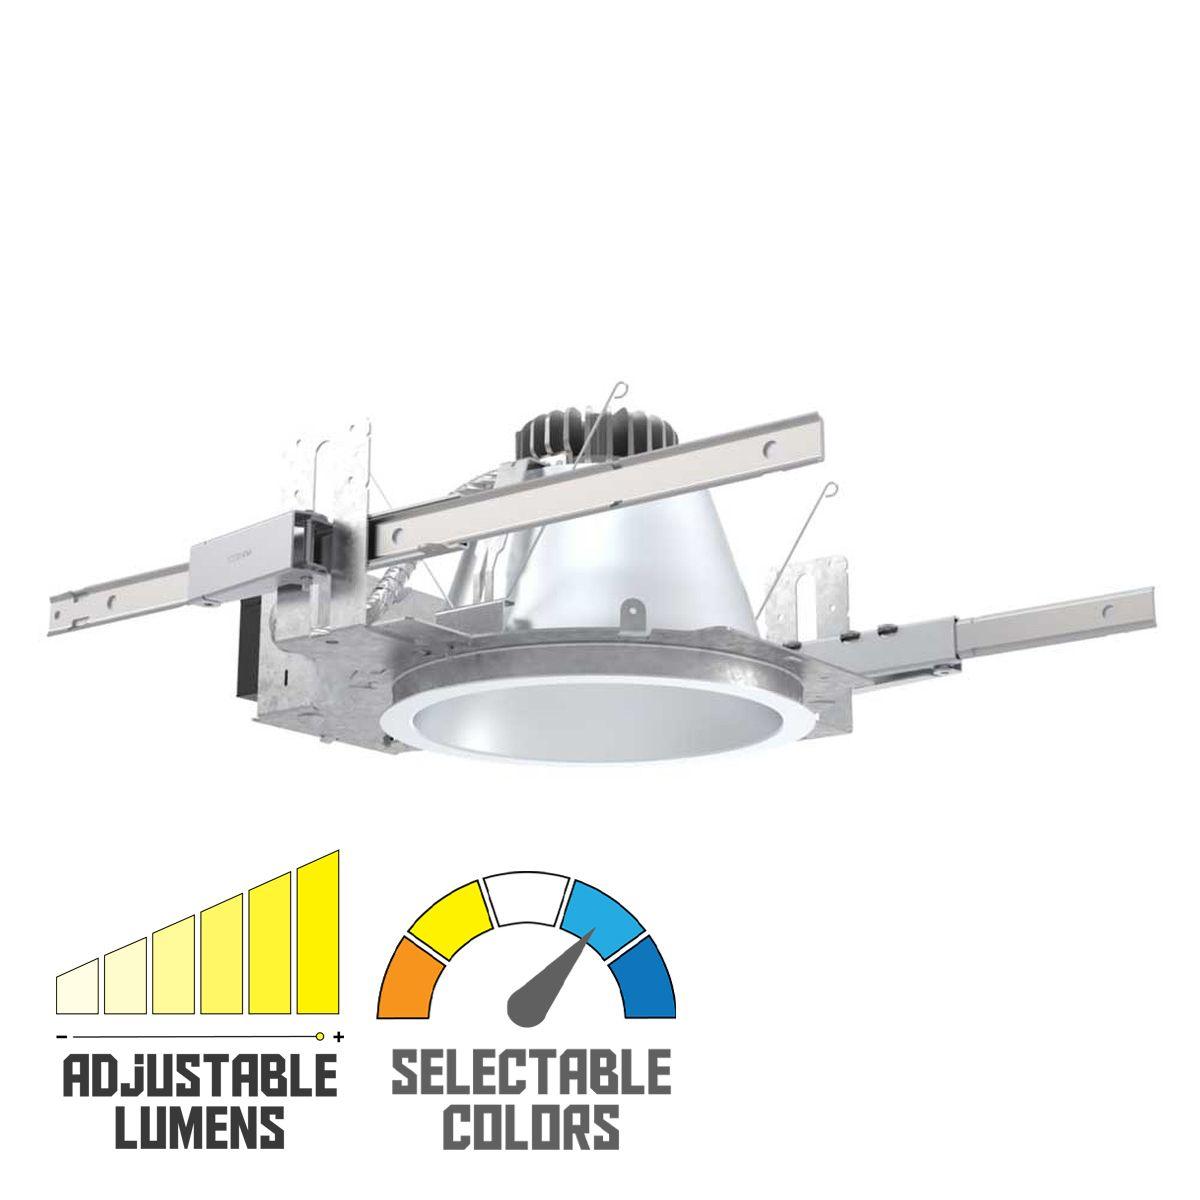 Lithonia LDN8 Commercial LED Recessed Downlight, 2600 Lumens Adjustable, Selectable CCT, 30K/35K/40K/50K (Reflector Sold Separately)